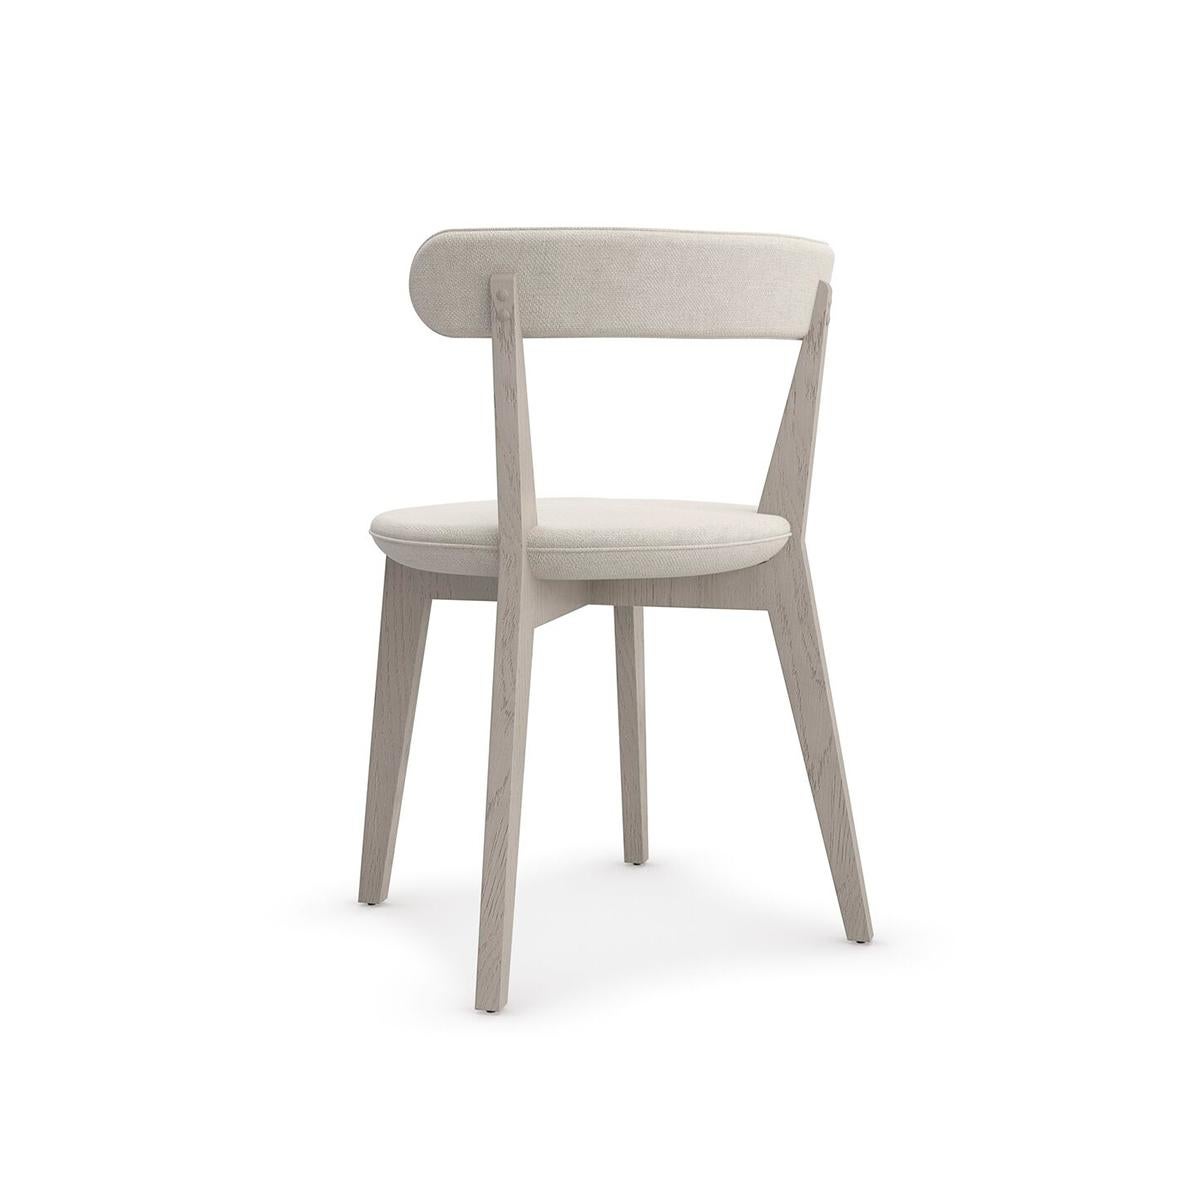 Asian Minimal Oak Dining Chair For Sale